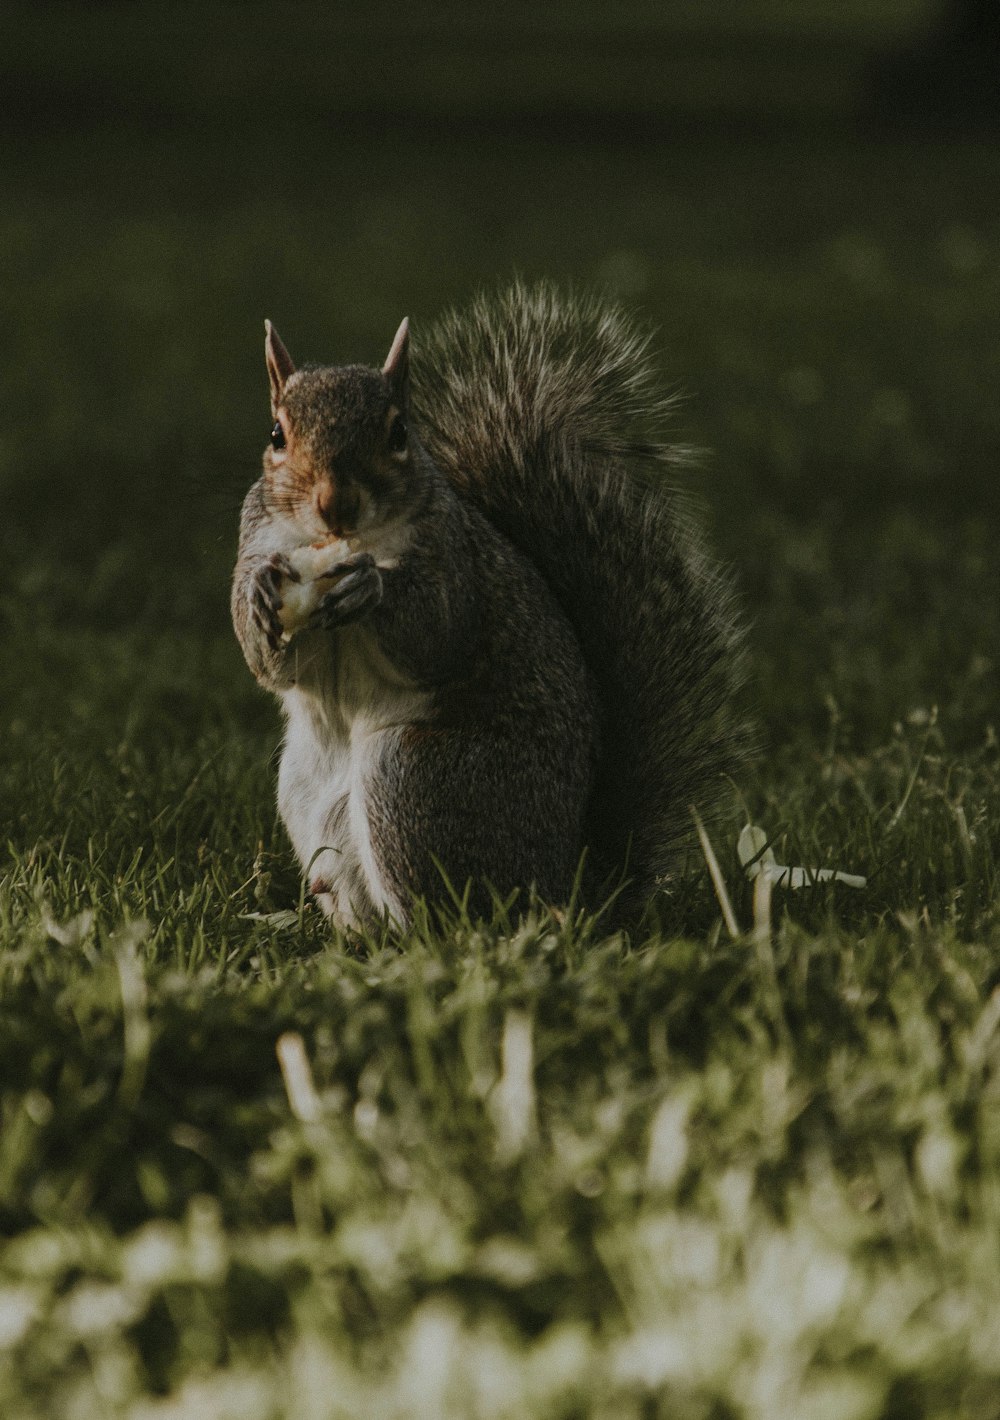 squirrel on grass during day